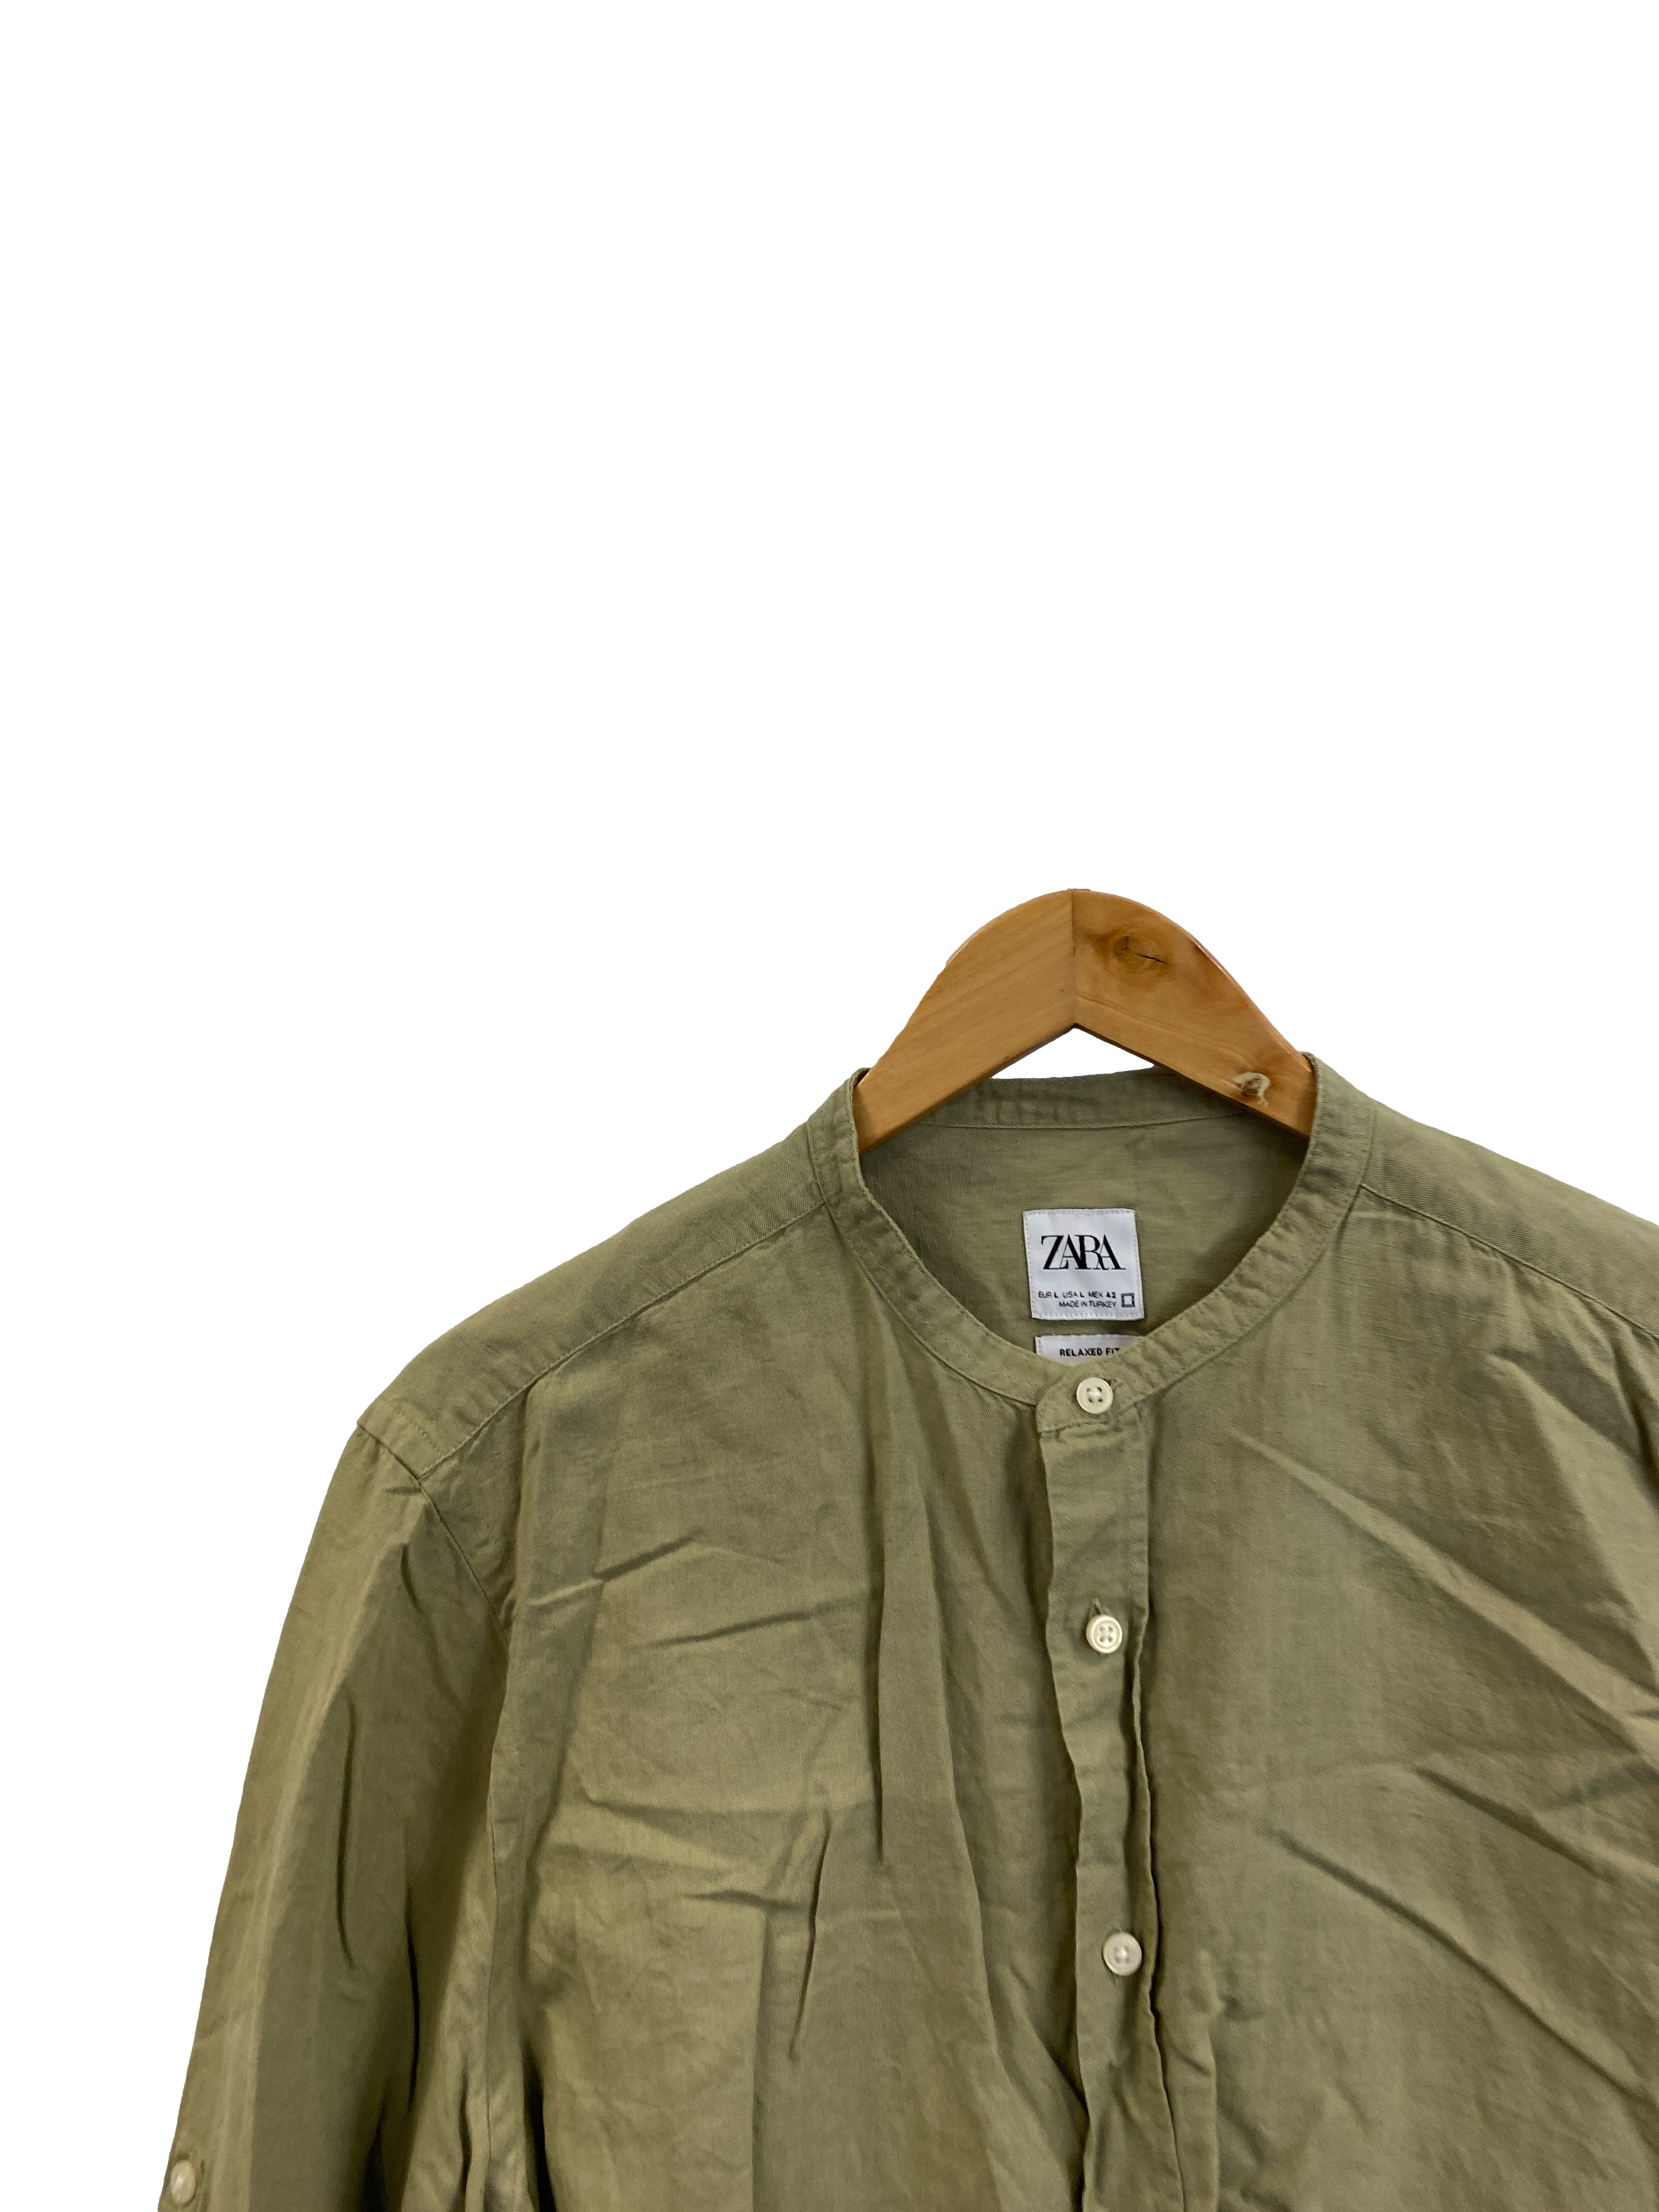 Olive Long Sleeve Top